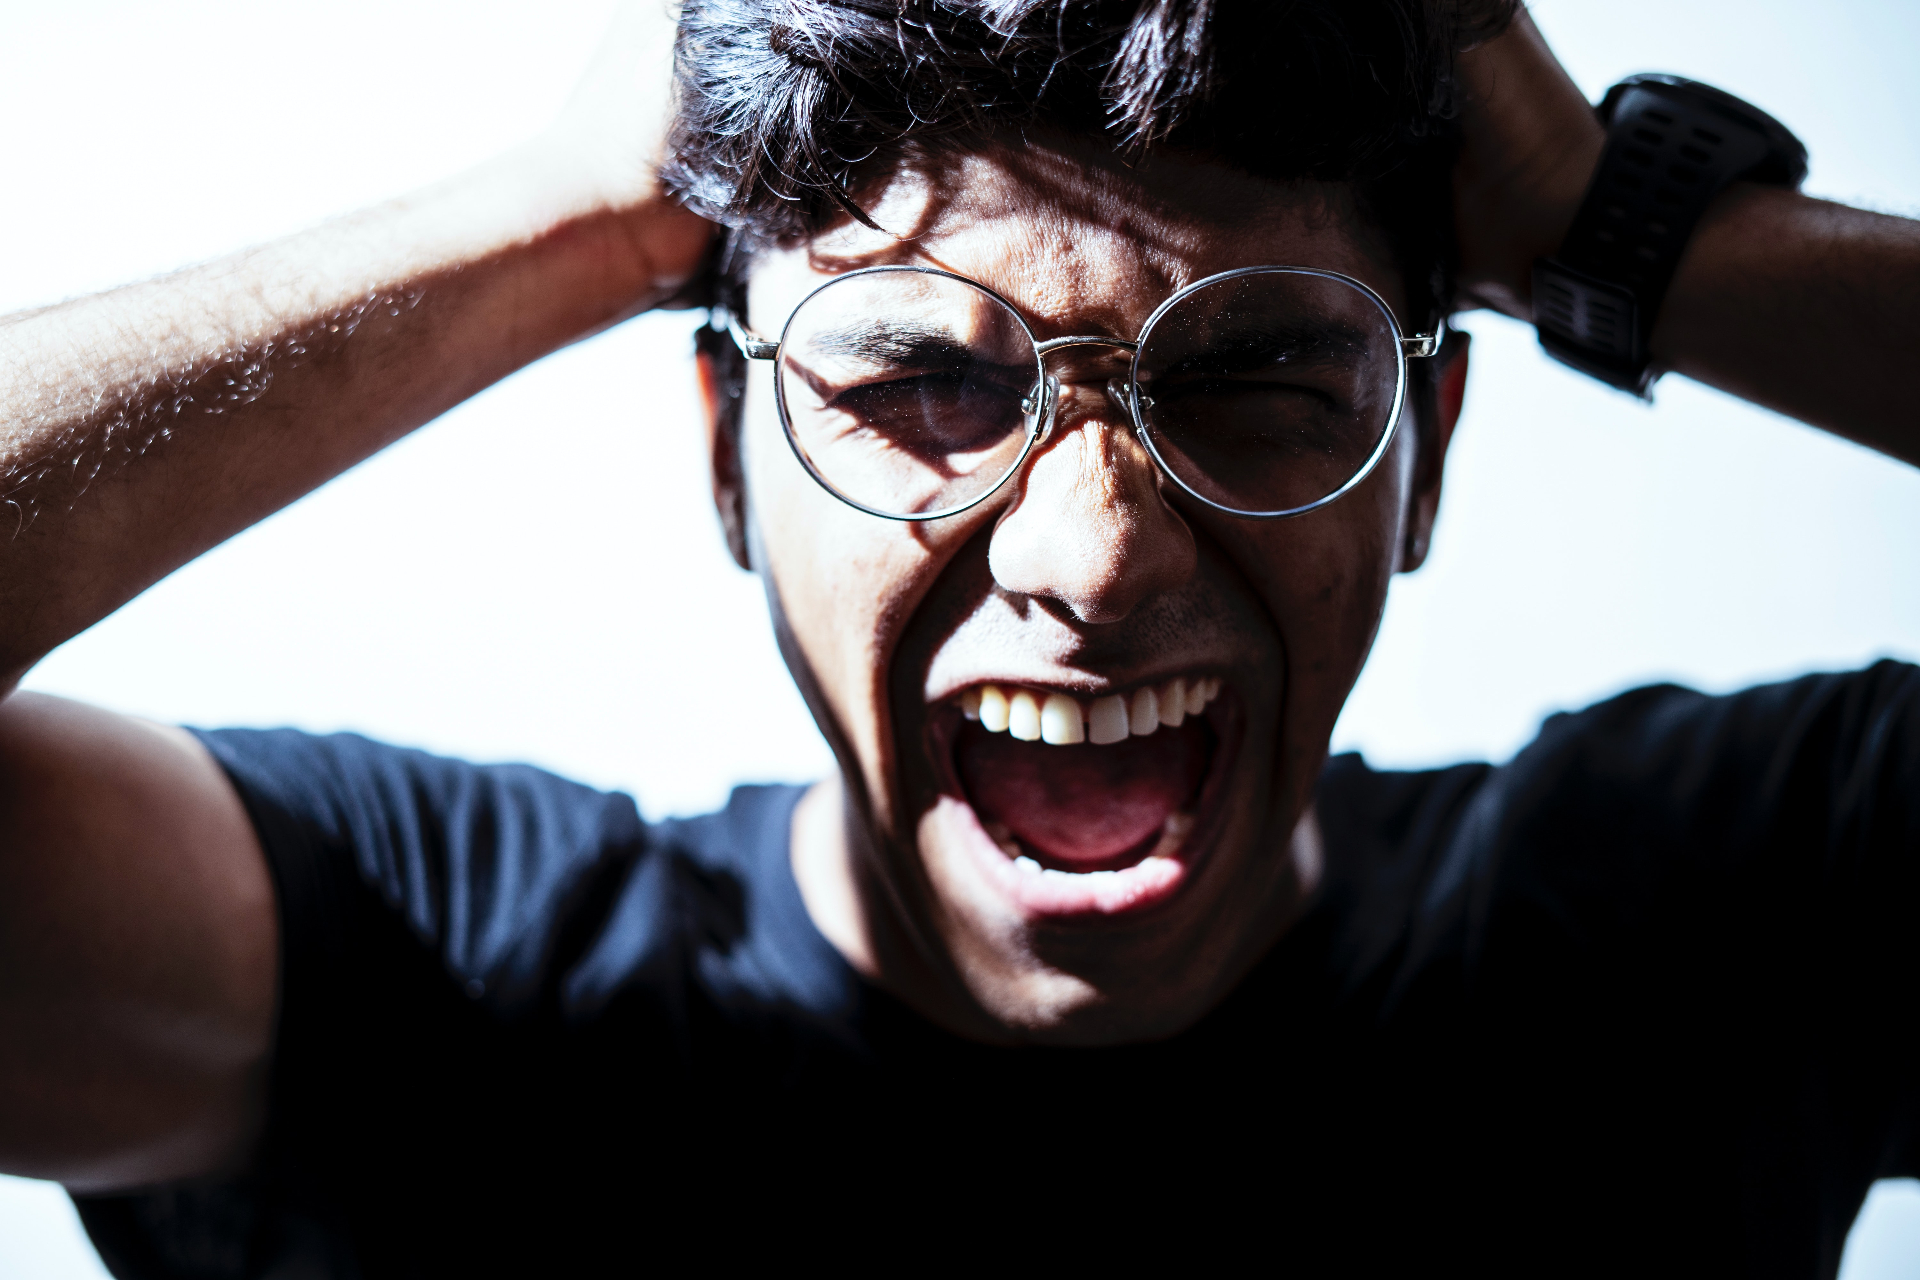 Man grabbing hair and screaming. When you are angry, is it hard for you to contain yourself? Is there anything you would like to know about coping better? Therapists in Delray, FL can help! Read here. 